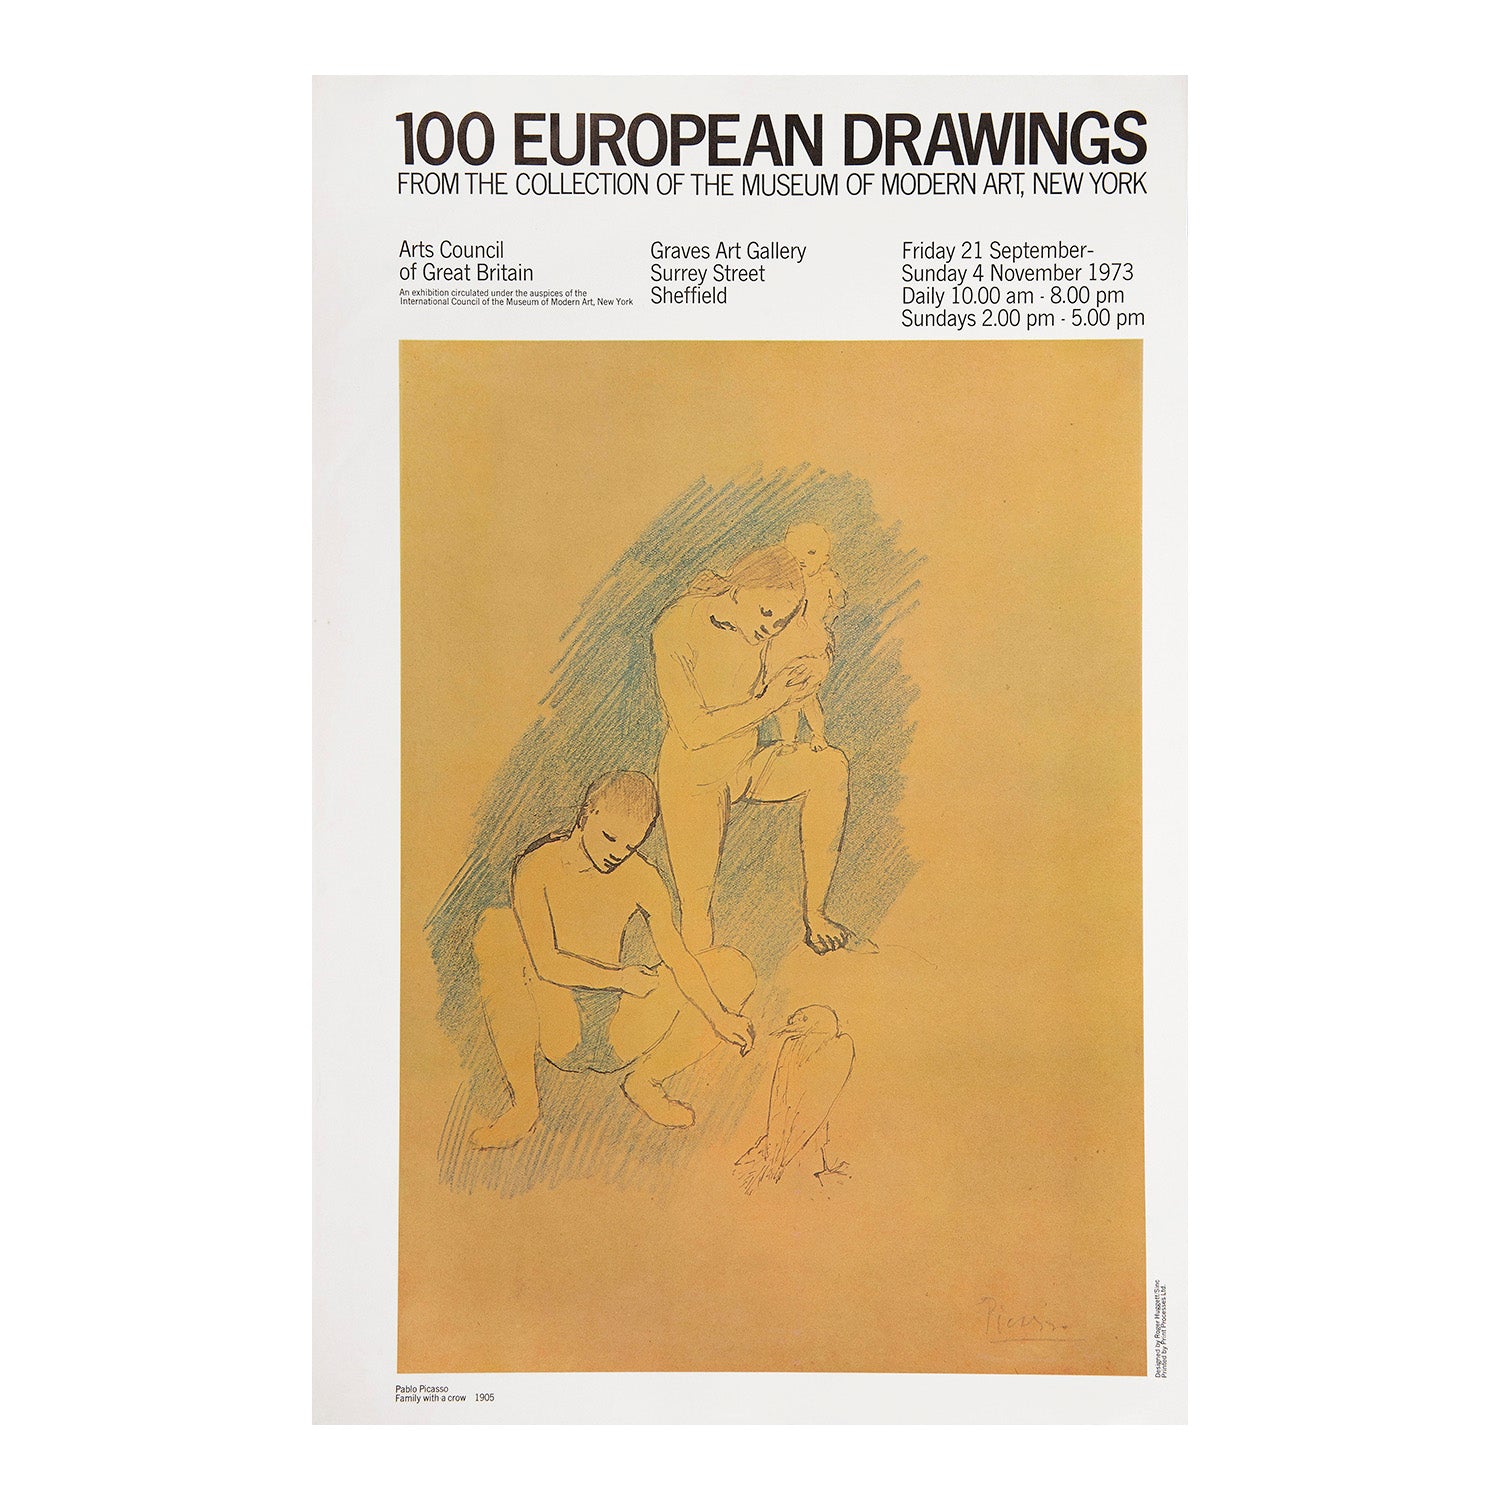 100 European Drawings from the collection of the Museum of Modern Art, New York (Exhibition)